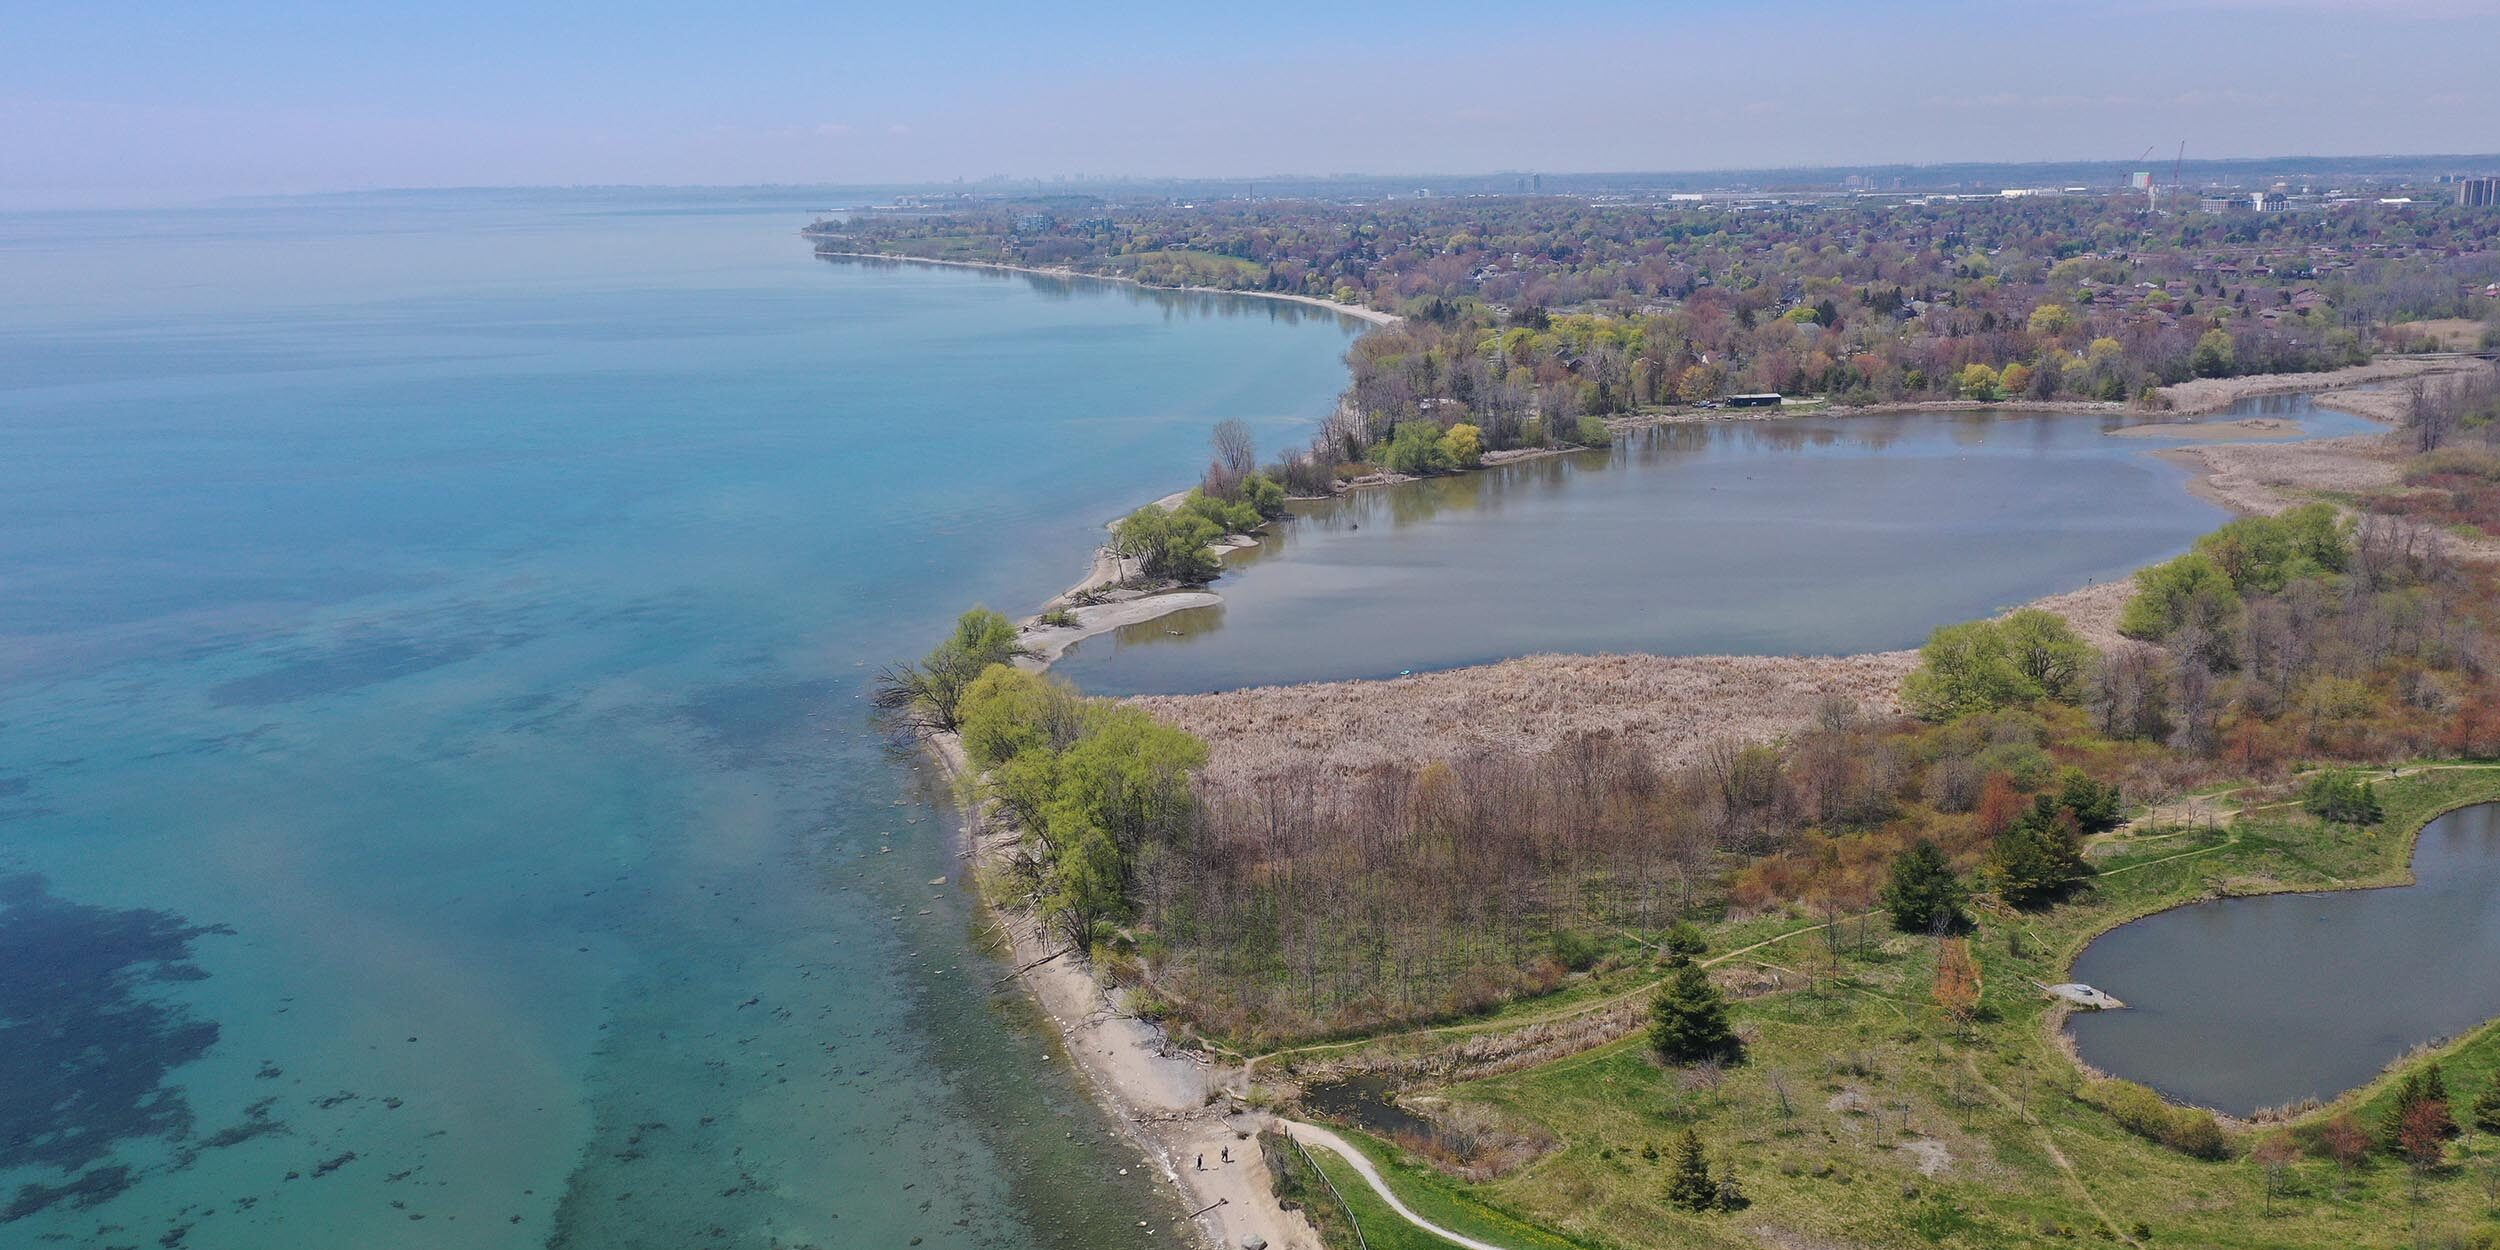 Aerial view of Carruthers Marsh and where it drains into Lake Ontario. There is a rocky beach on either side of a narrow marsh mouth with trees growing close to the shoreline. The marsh has a large open water area surrounded by marsh vegetation.